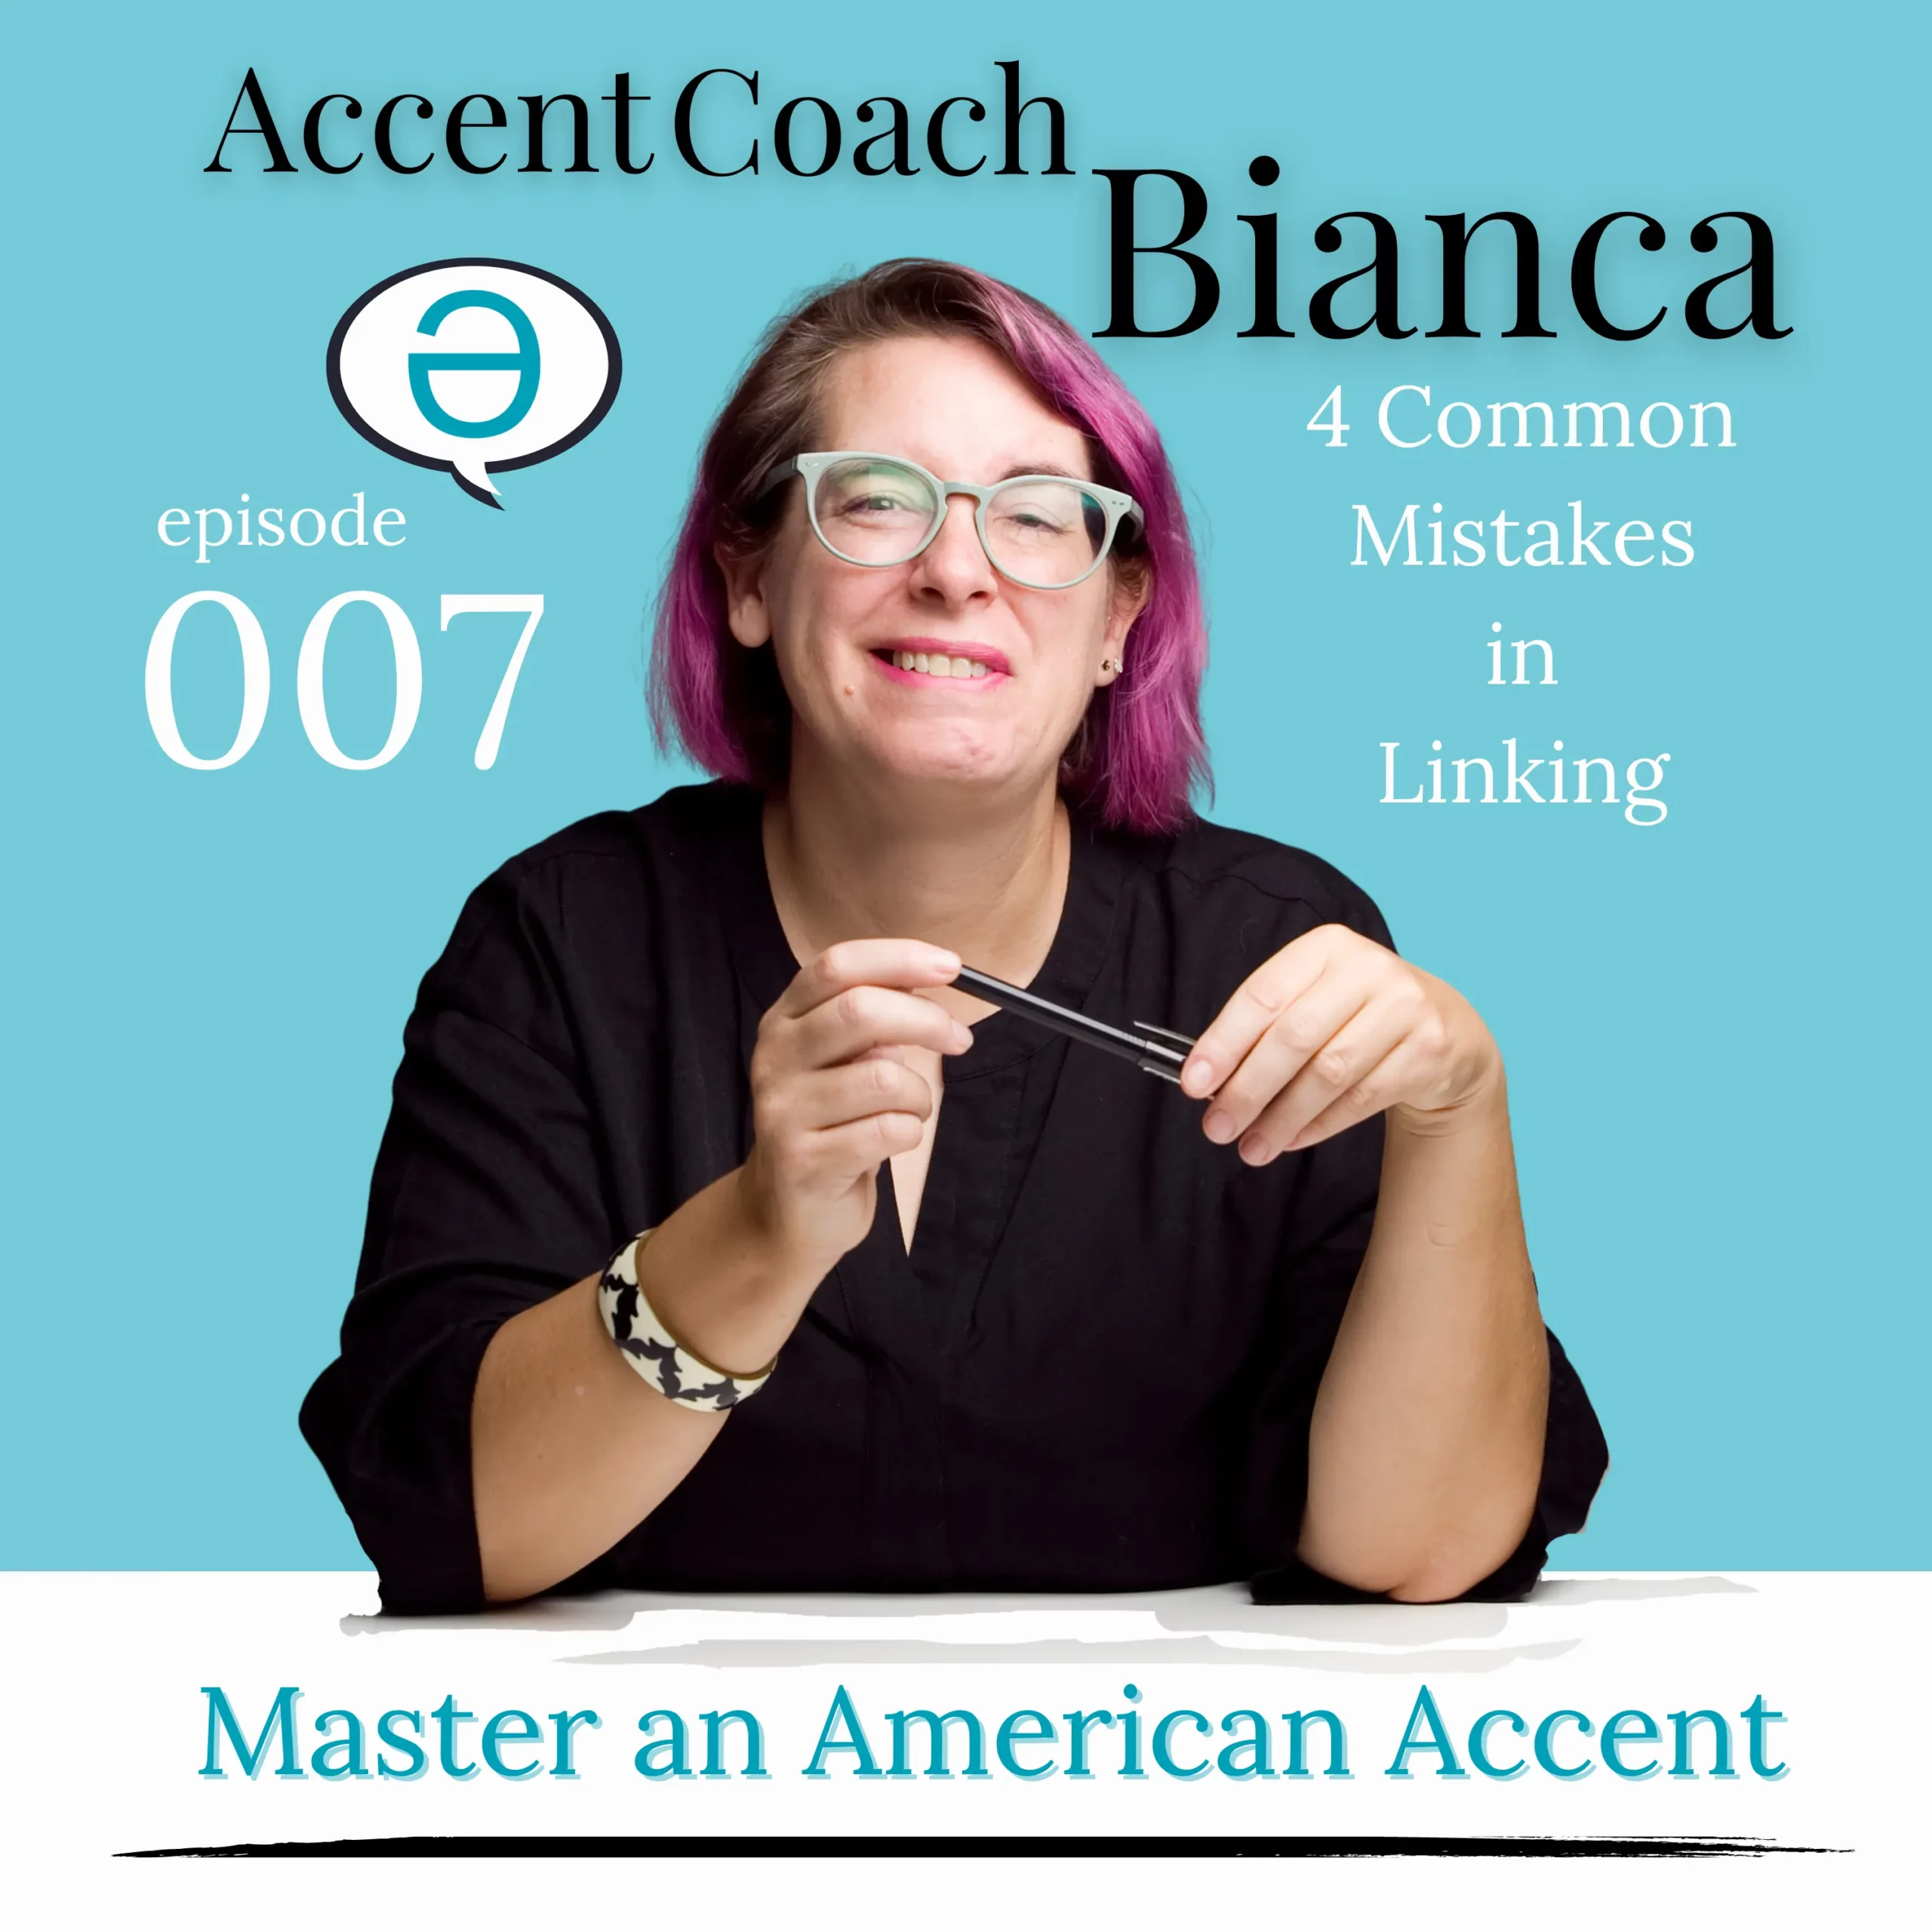 Listen to a podcast about the American Accent here.